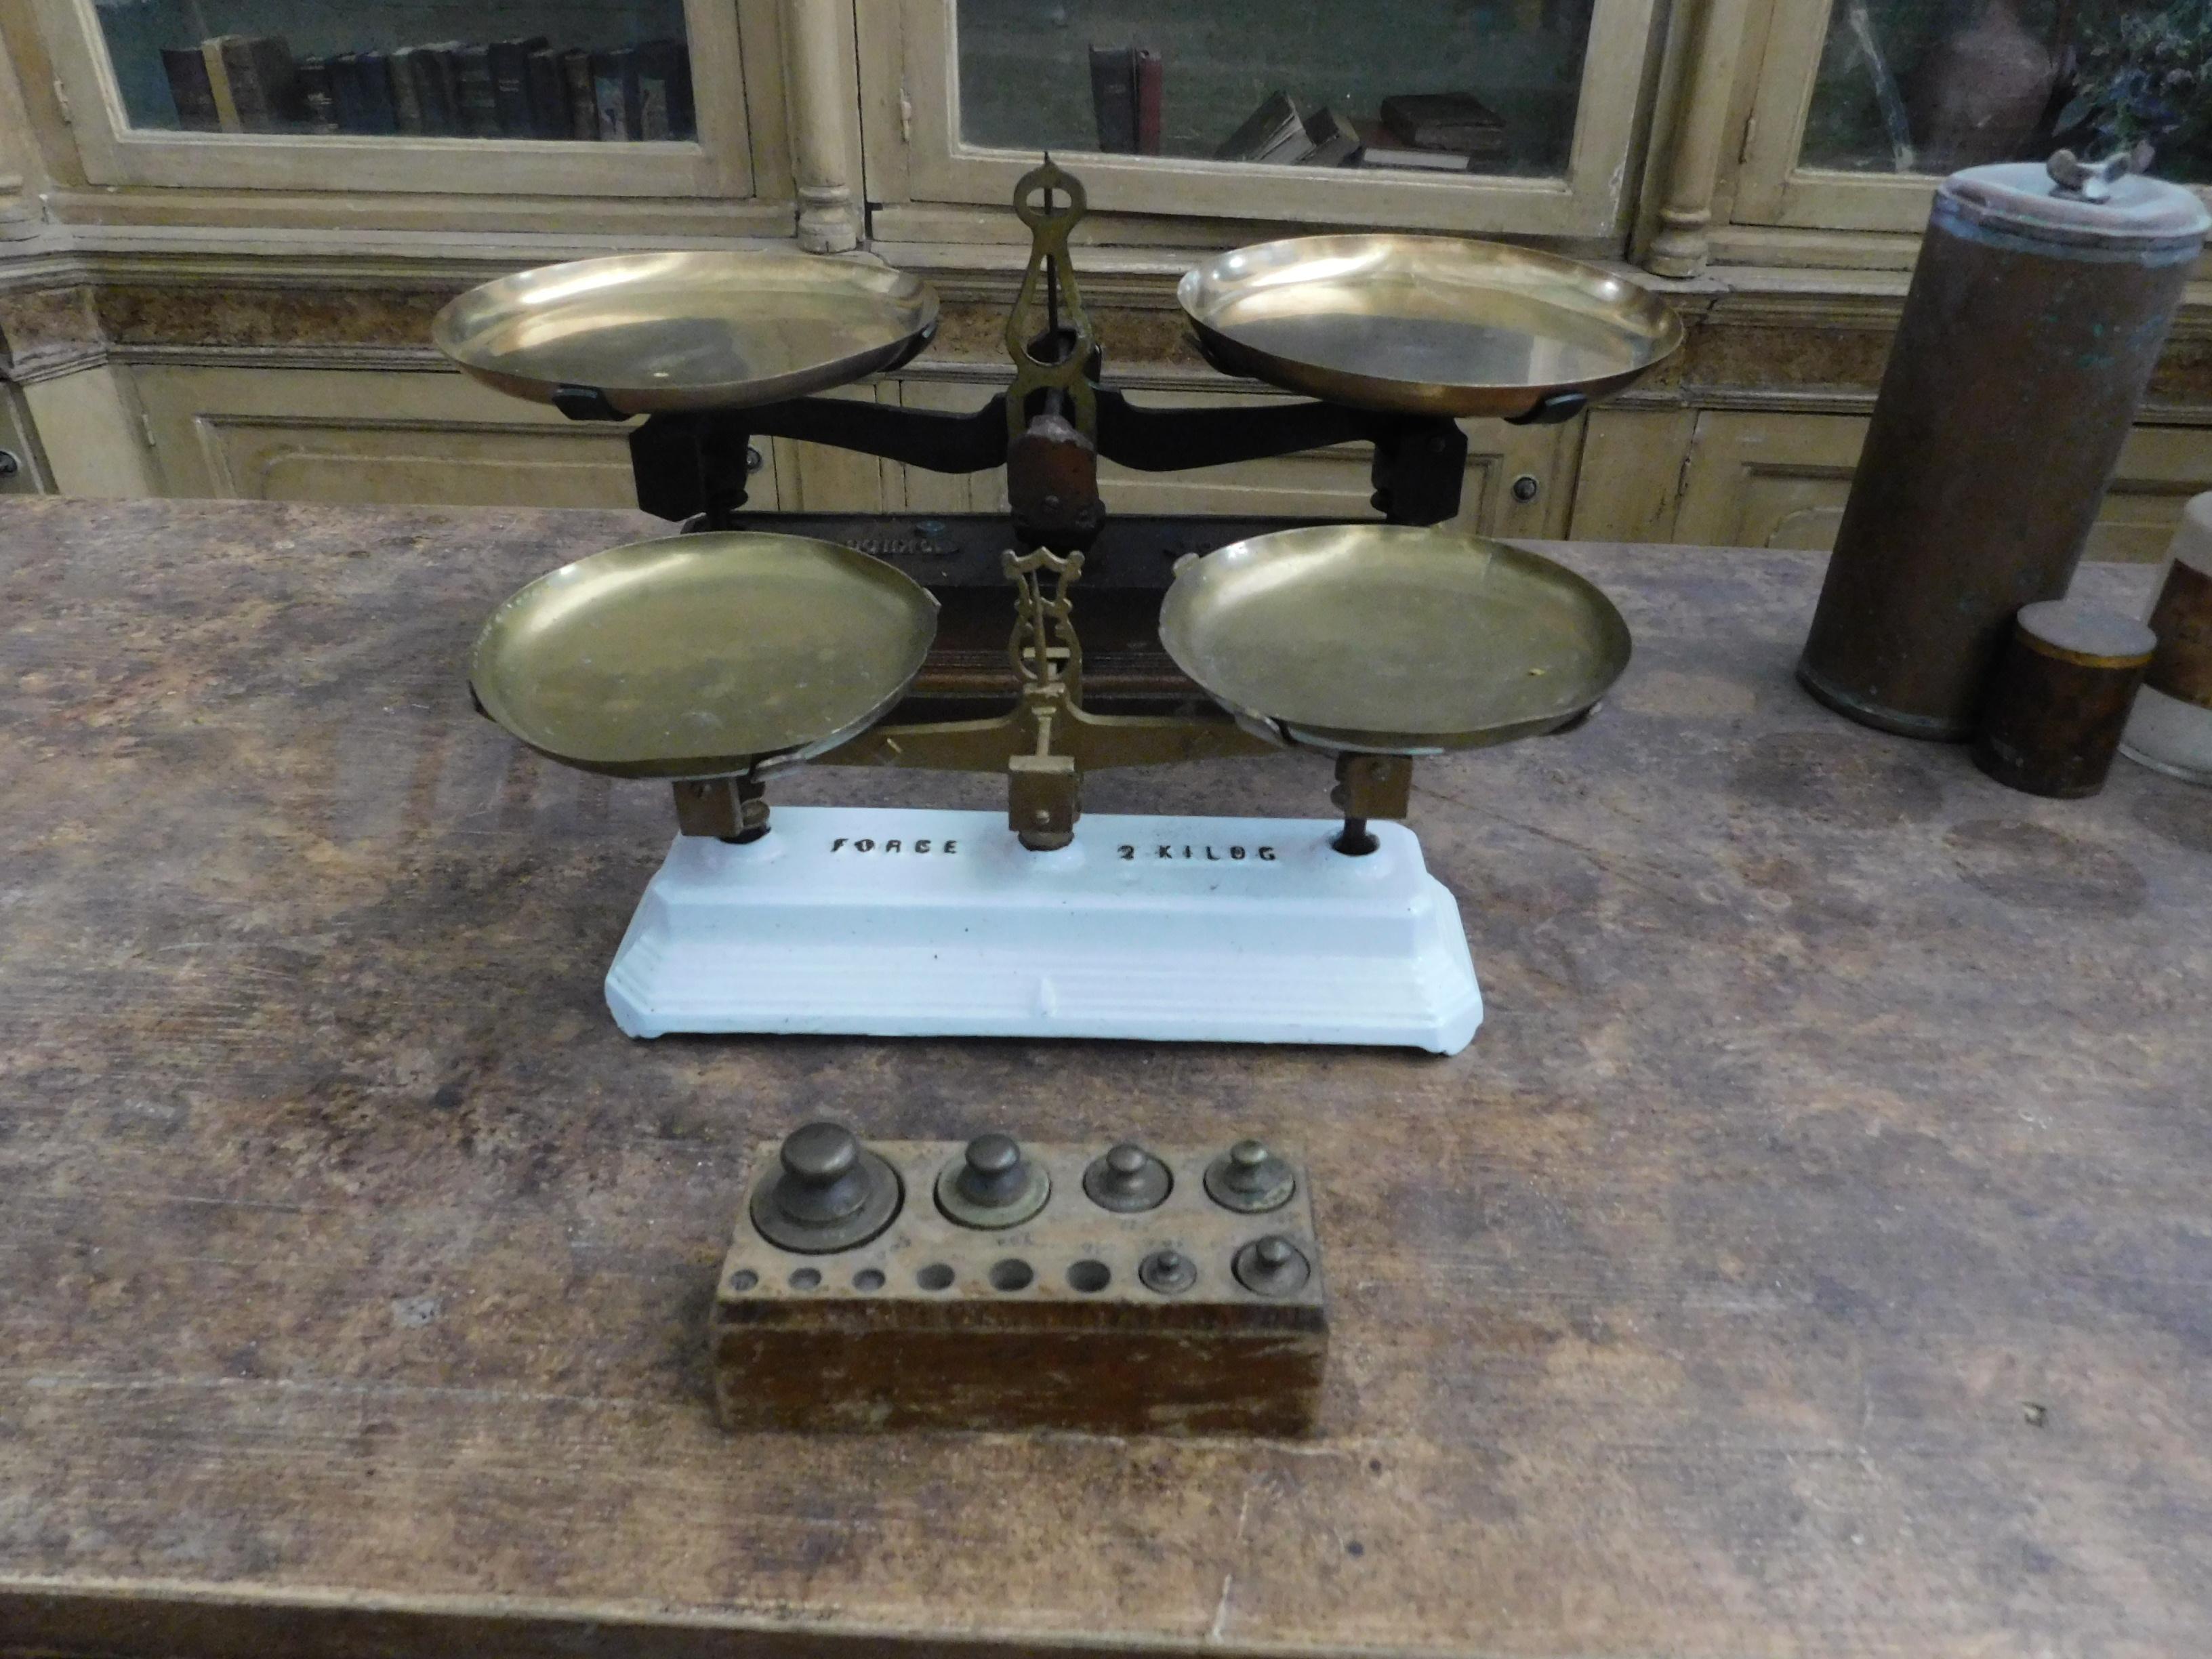 Antique set composed of 2 brass scale (balance) with also set of weights for one, probably from a pharmacy of France, composed of white and black ceramic and bronze plates, 19th century, beautiful and well kept, the price refers to the set complete,